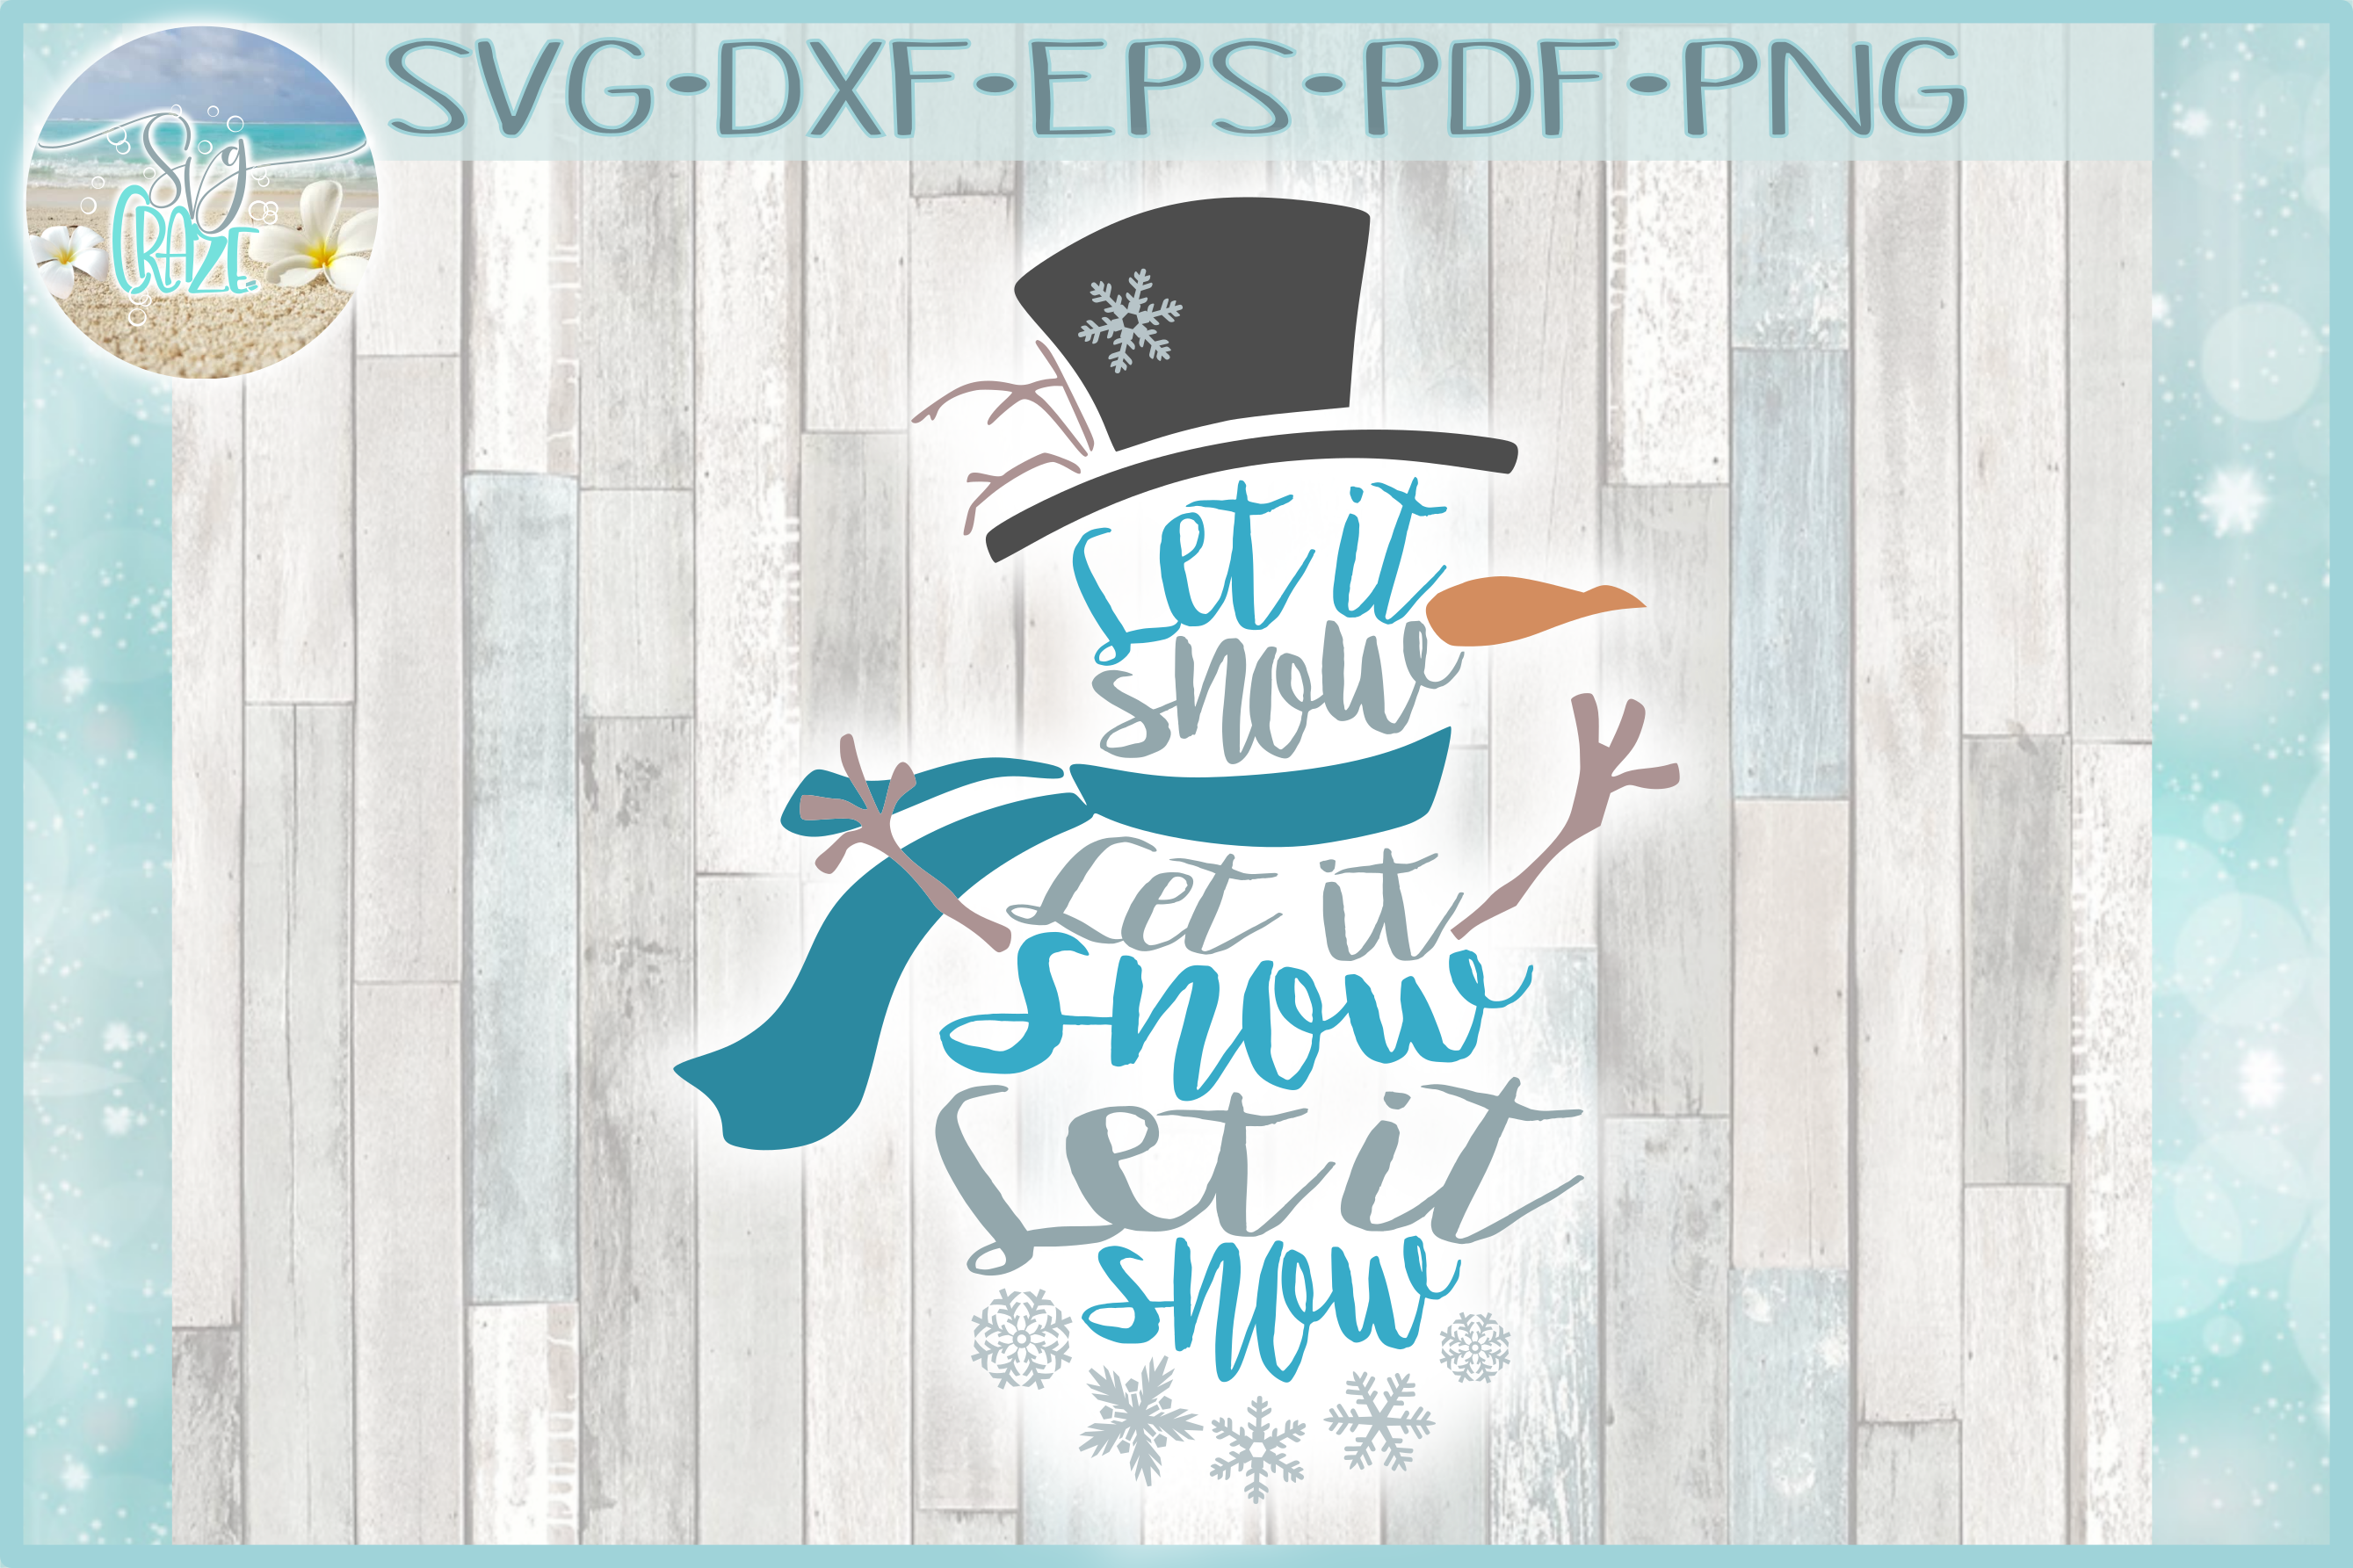 Download Let It Snow Word Snowman Christmas Winter Holiday SVG